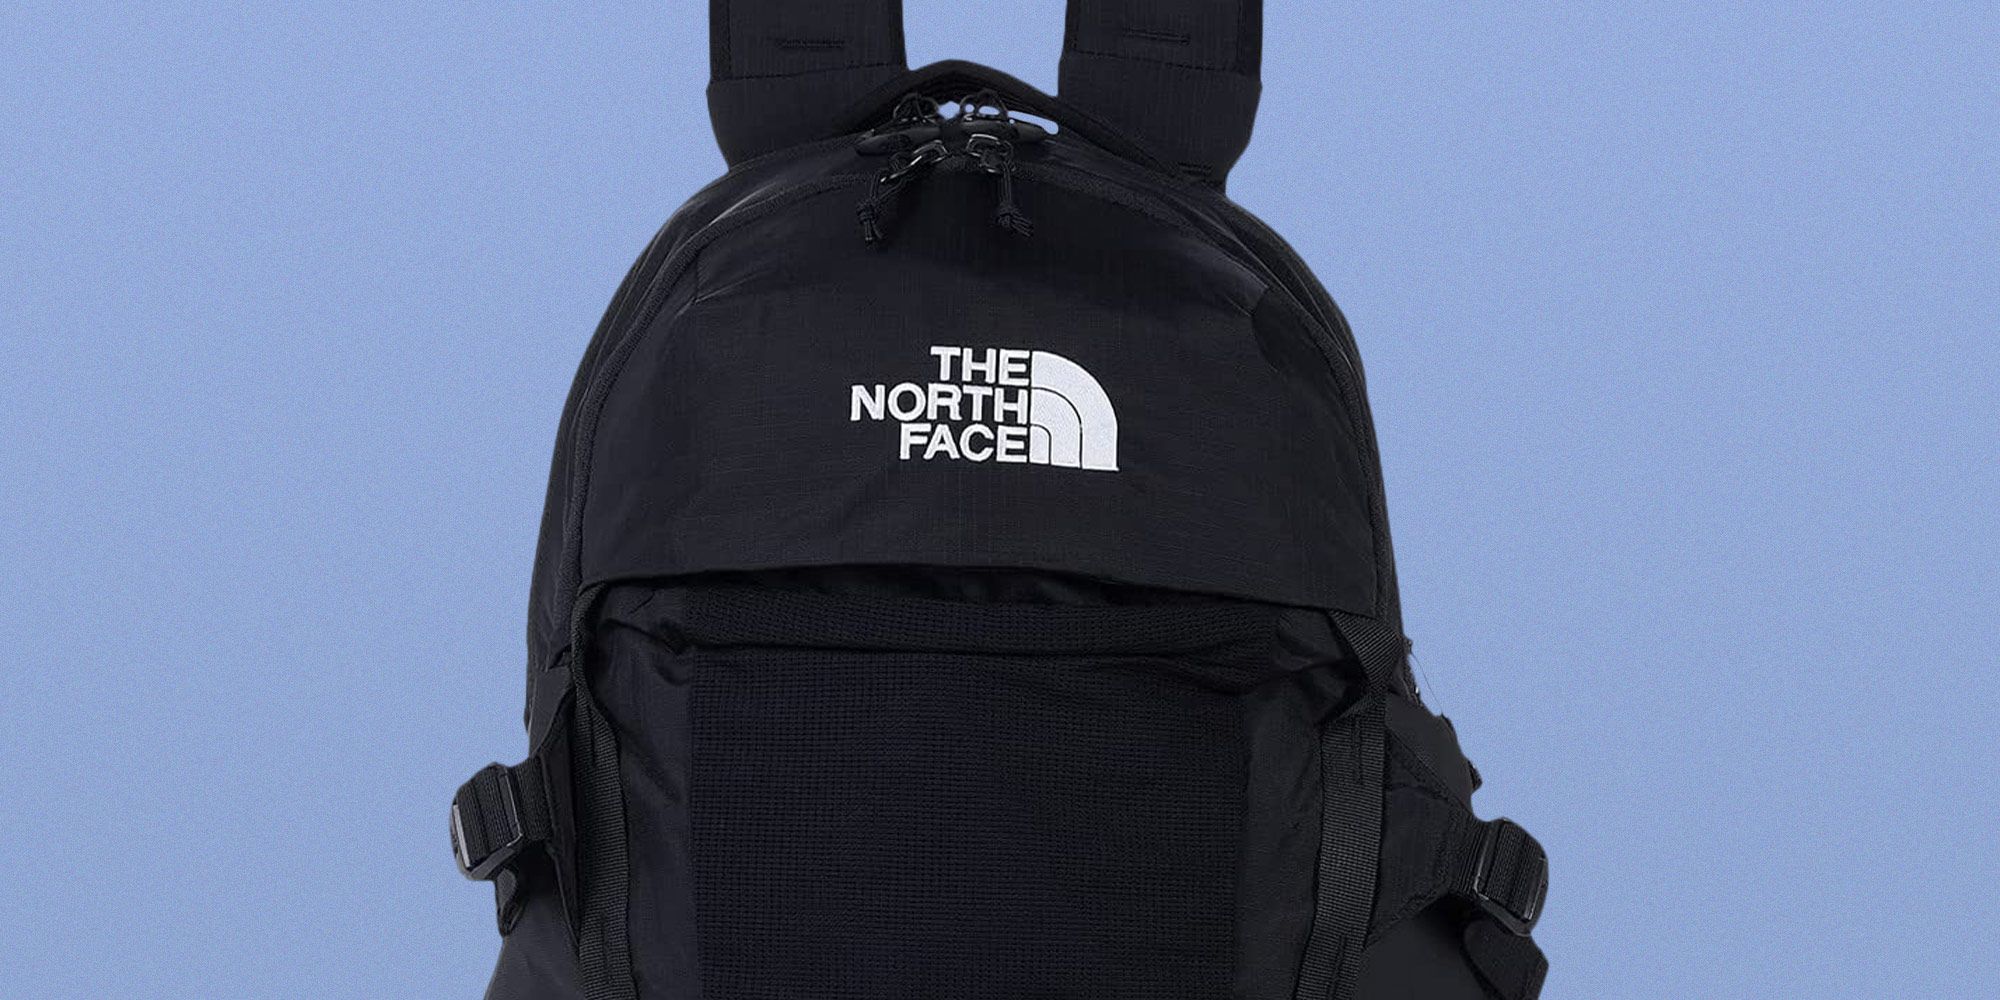 Pathologisch Leven van niet verwant This North Face Backpack Is Our Just Get This Pick for Every Day